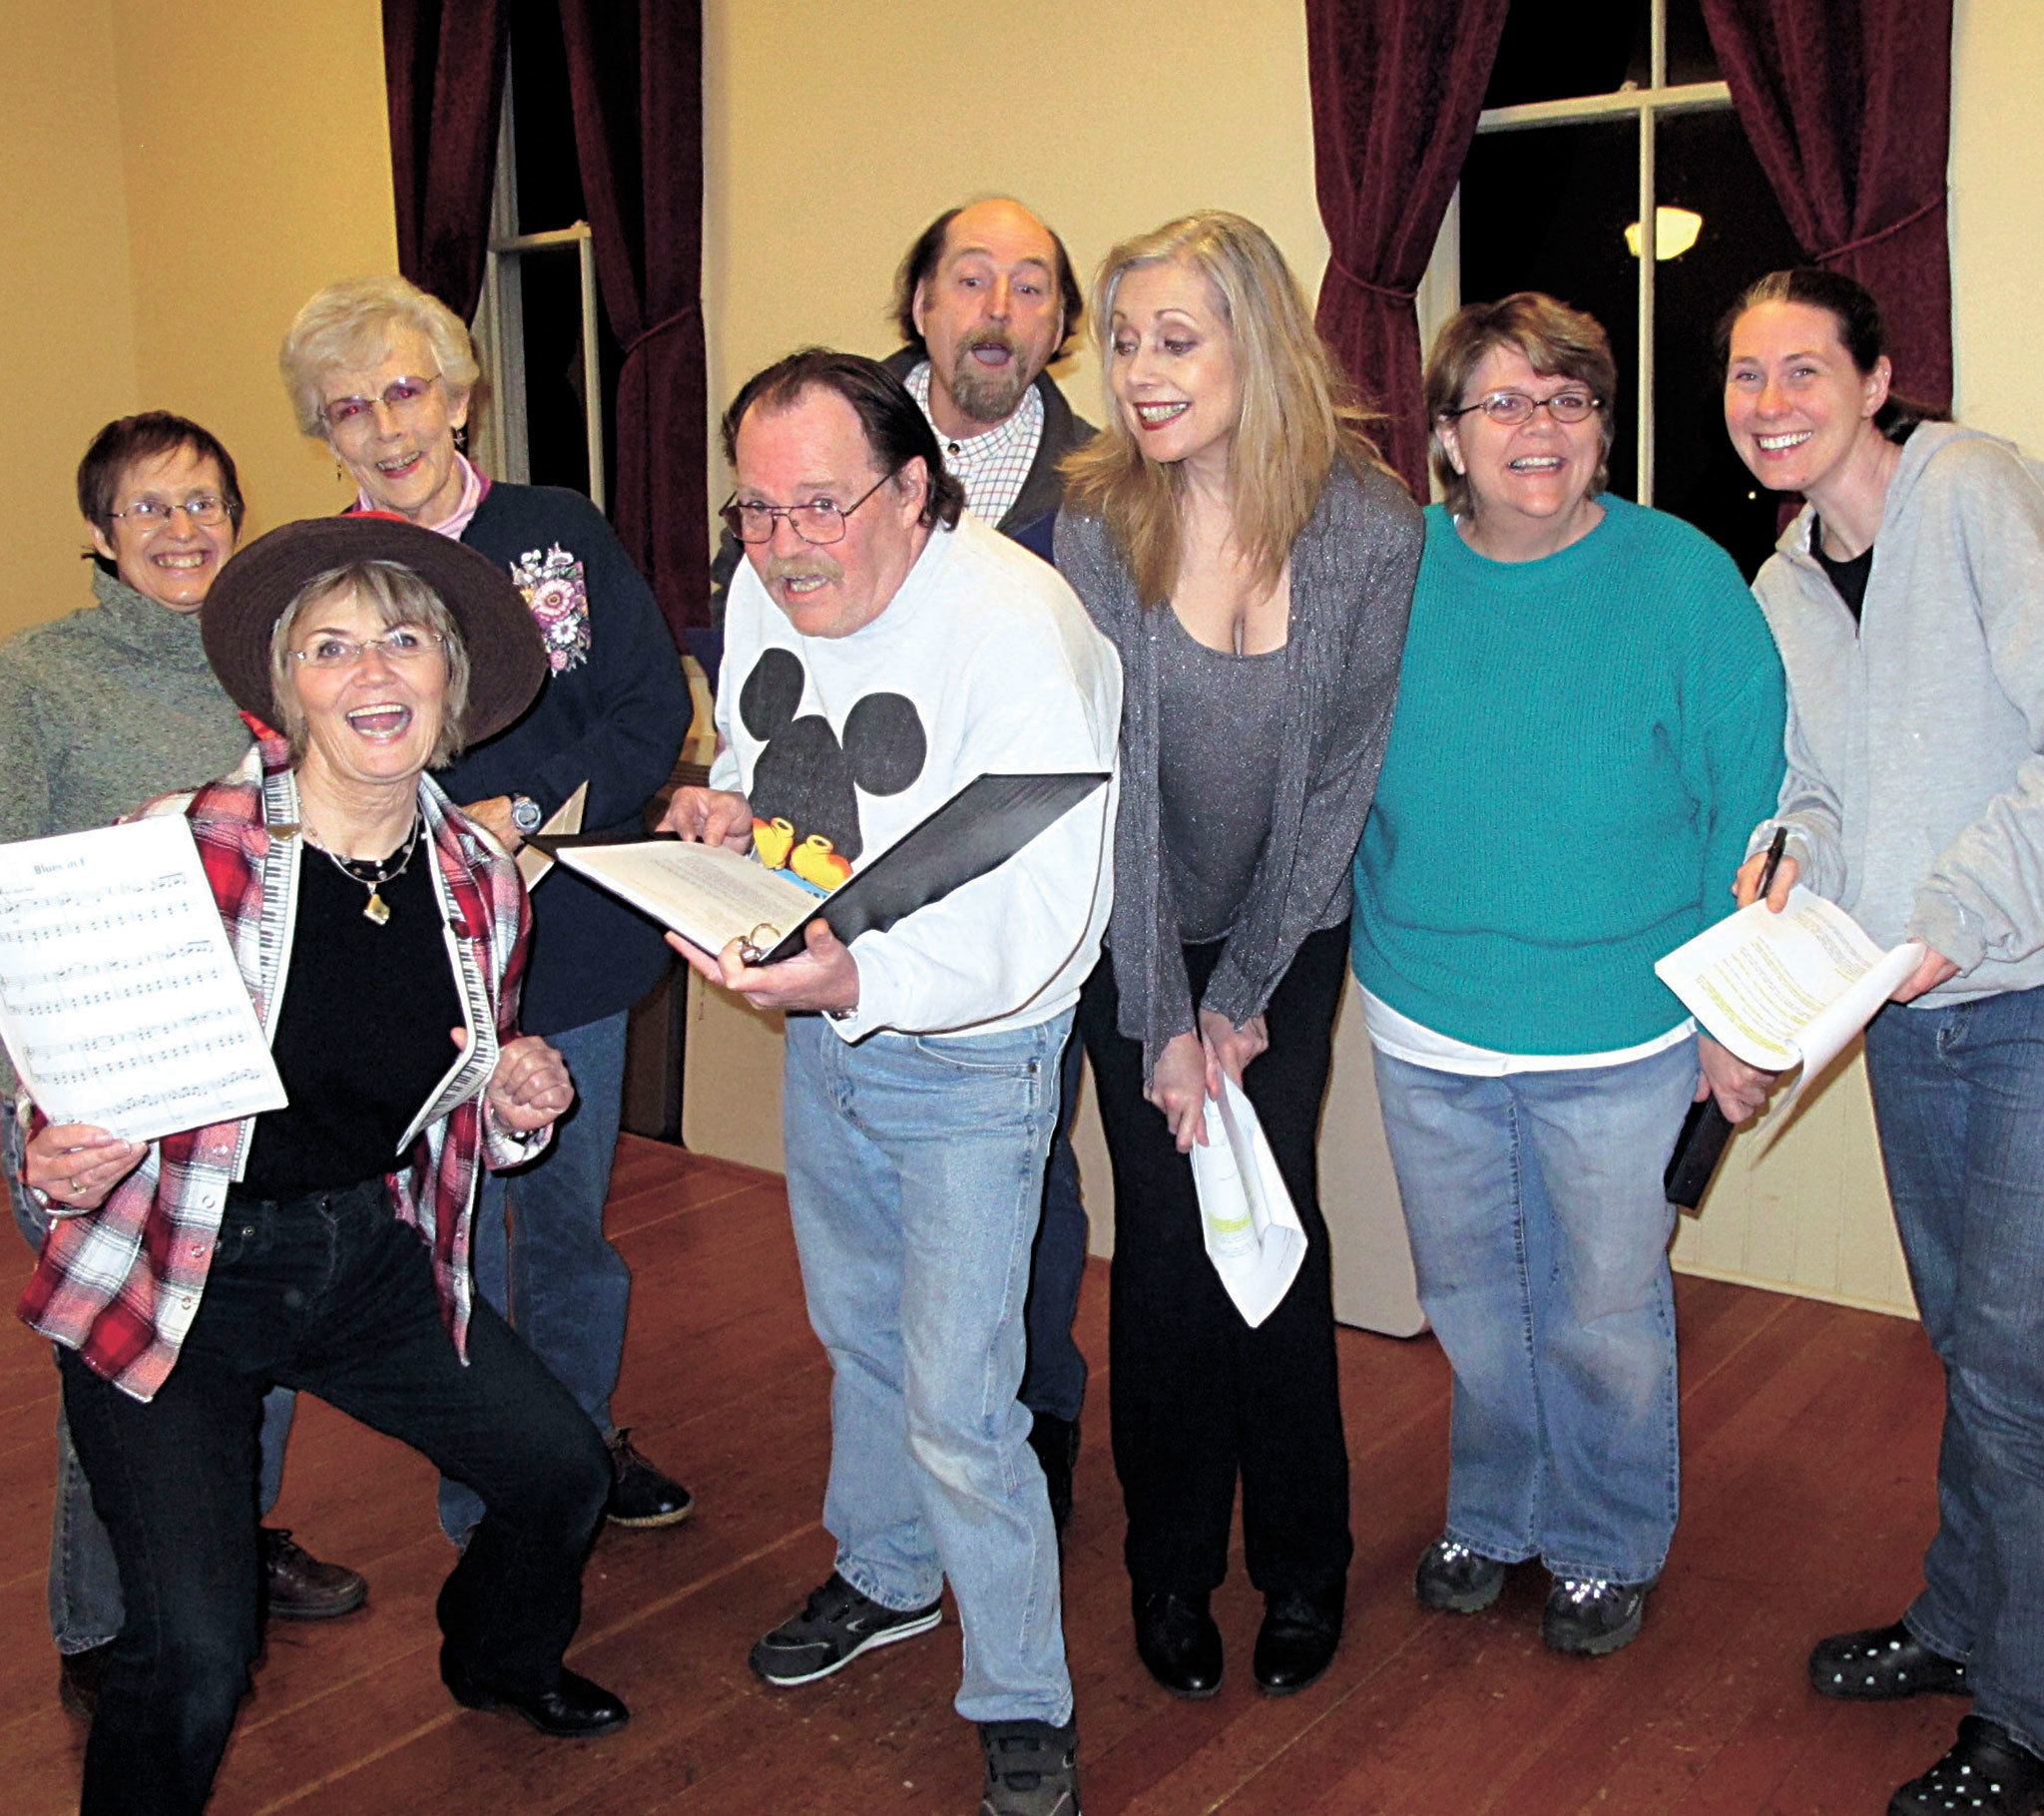 Performers, from left, Barbara Wilson, Sandi Lockwood, Barbara Hughes, Ric Munhall, Jeff Cool, Alexandria Edouart, Mary Griffith and Erika van Calcar make up the cast of the Readers Theatre Plus’ “Murder Most Fowl” in 2011.